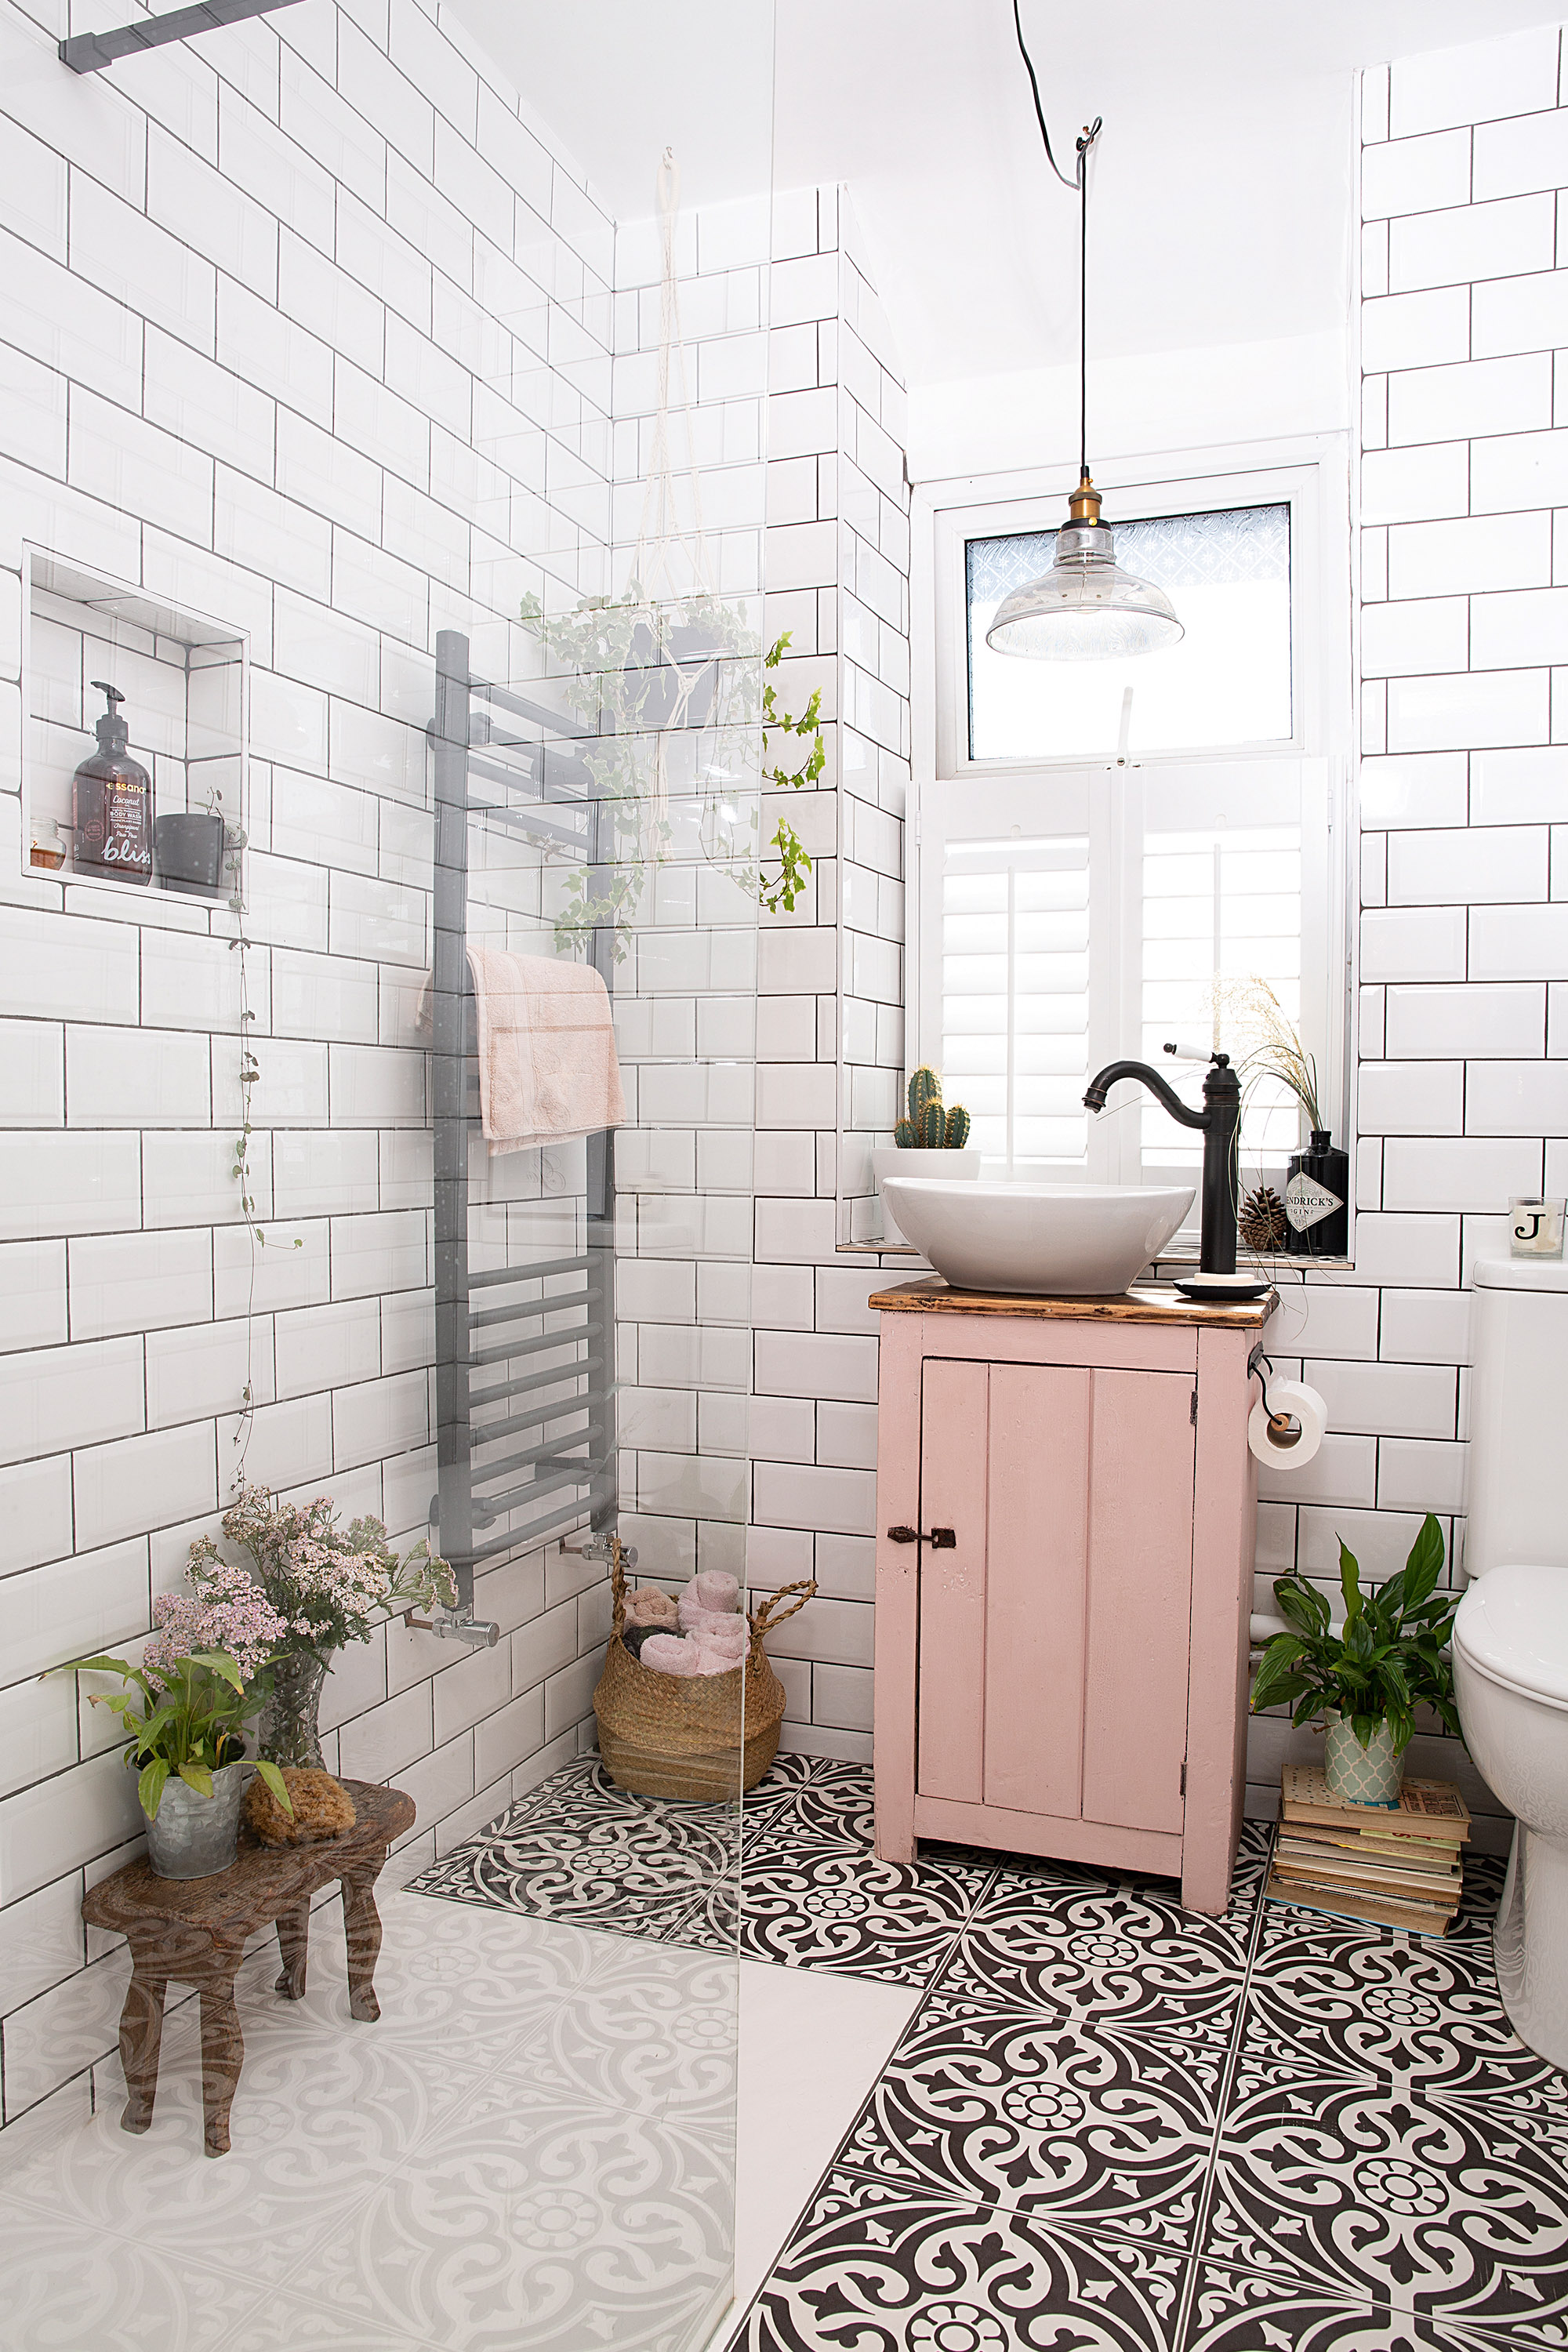 Walk in shower ideas: 7 looks to add some luxury to your bathroom